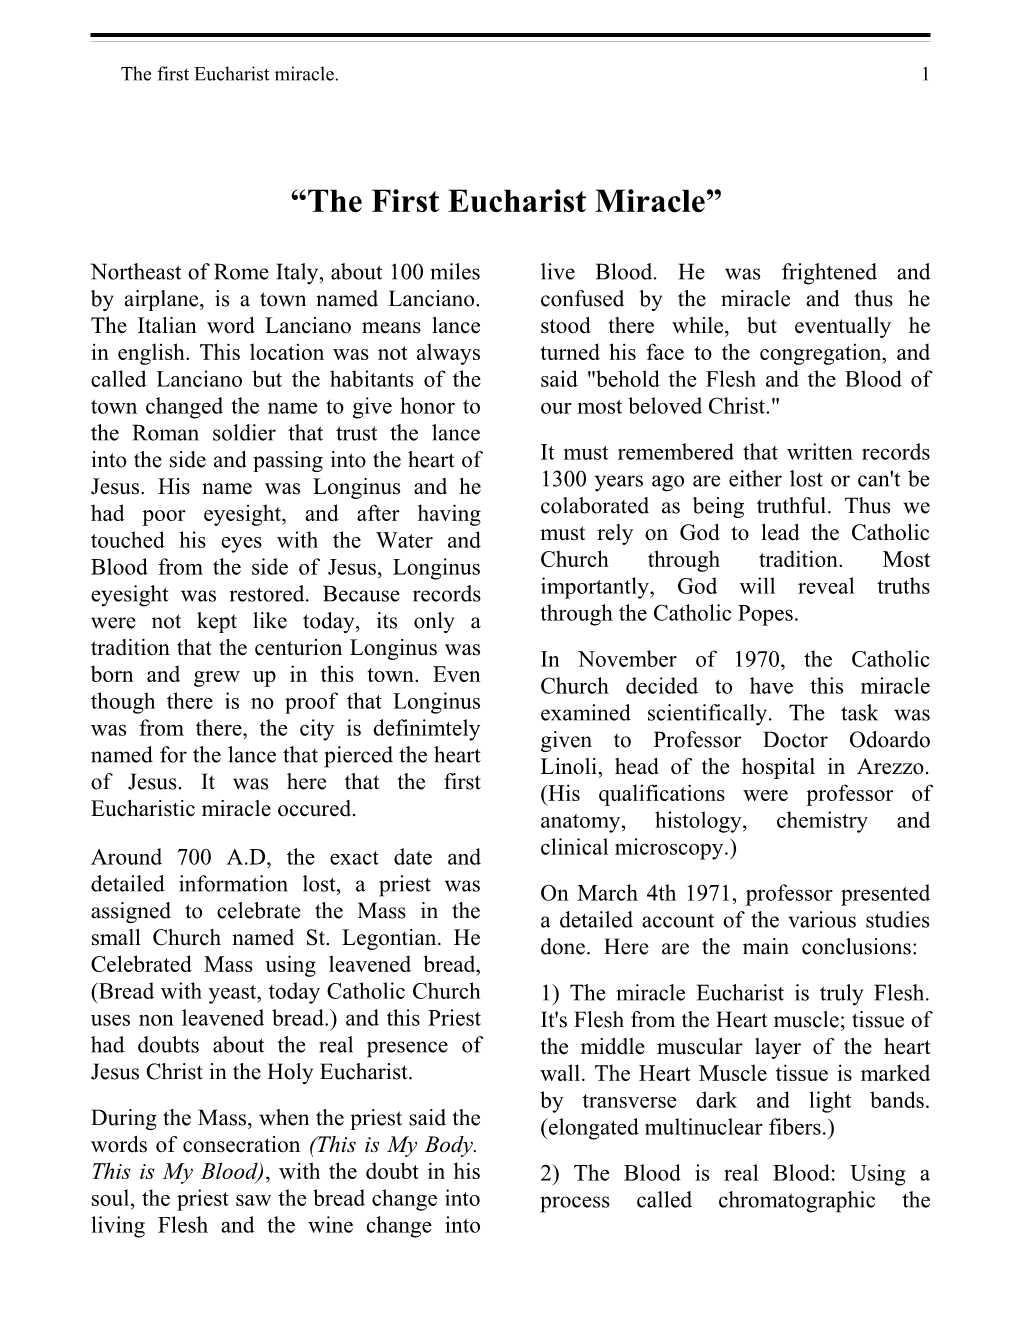 The First Eucharist Miracle